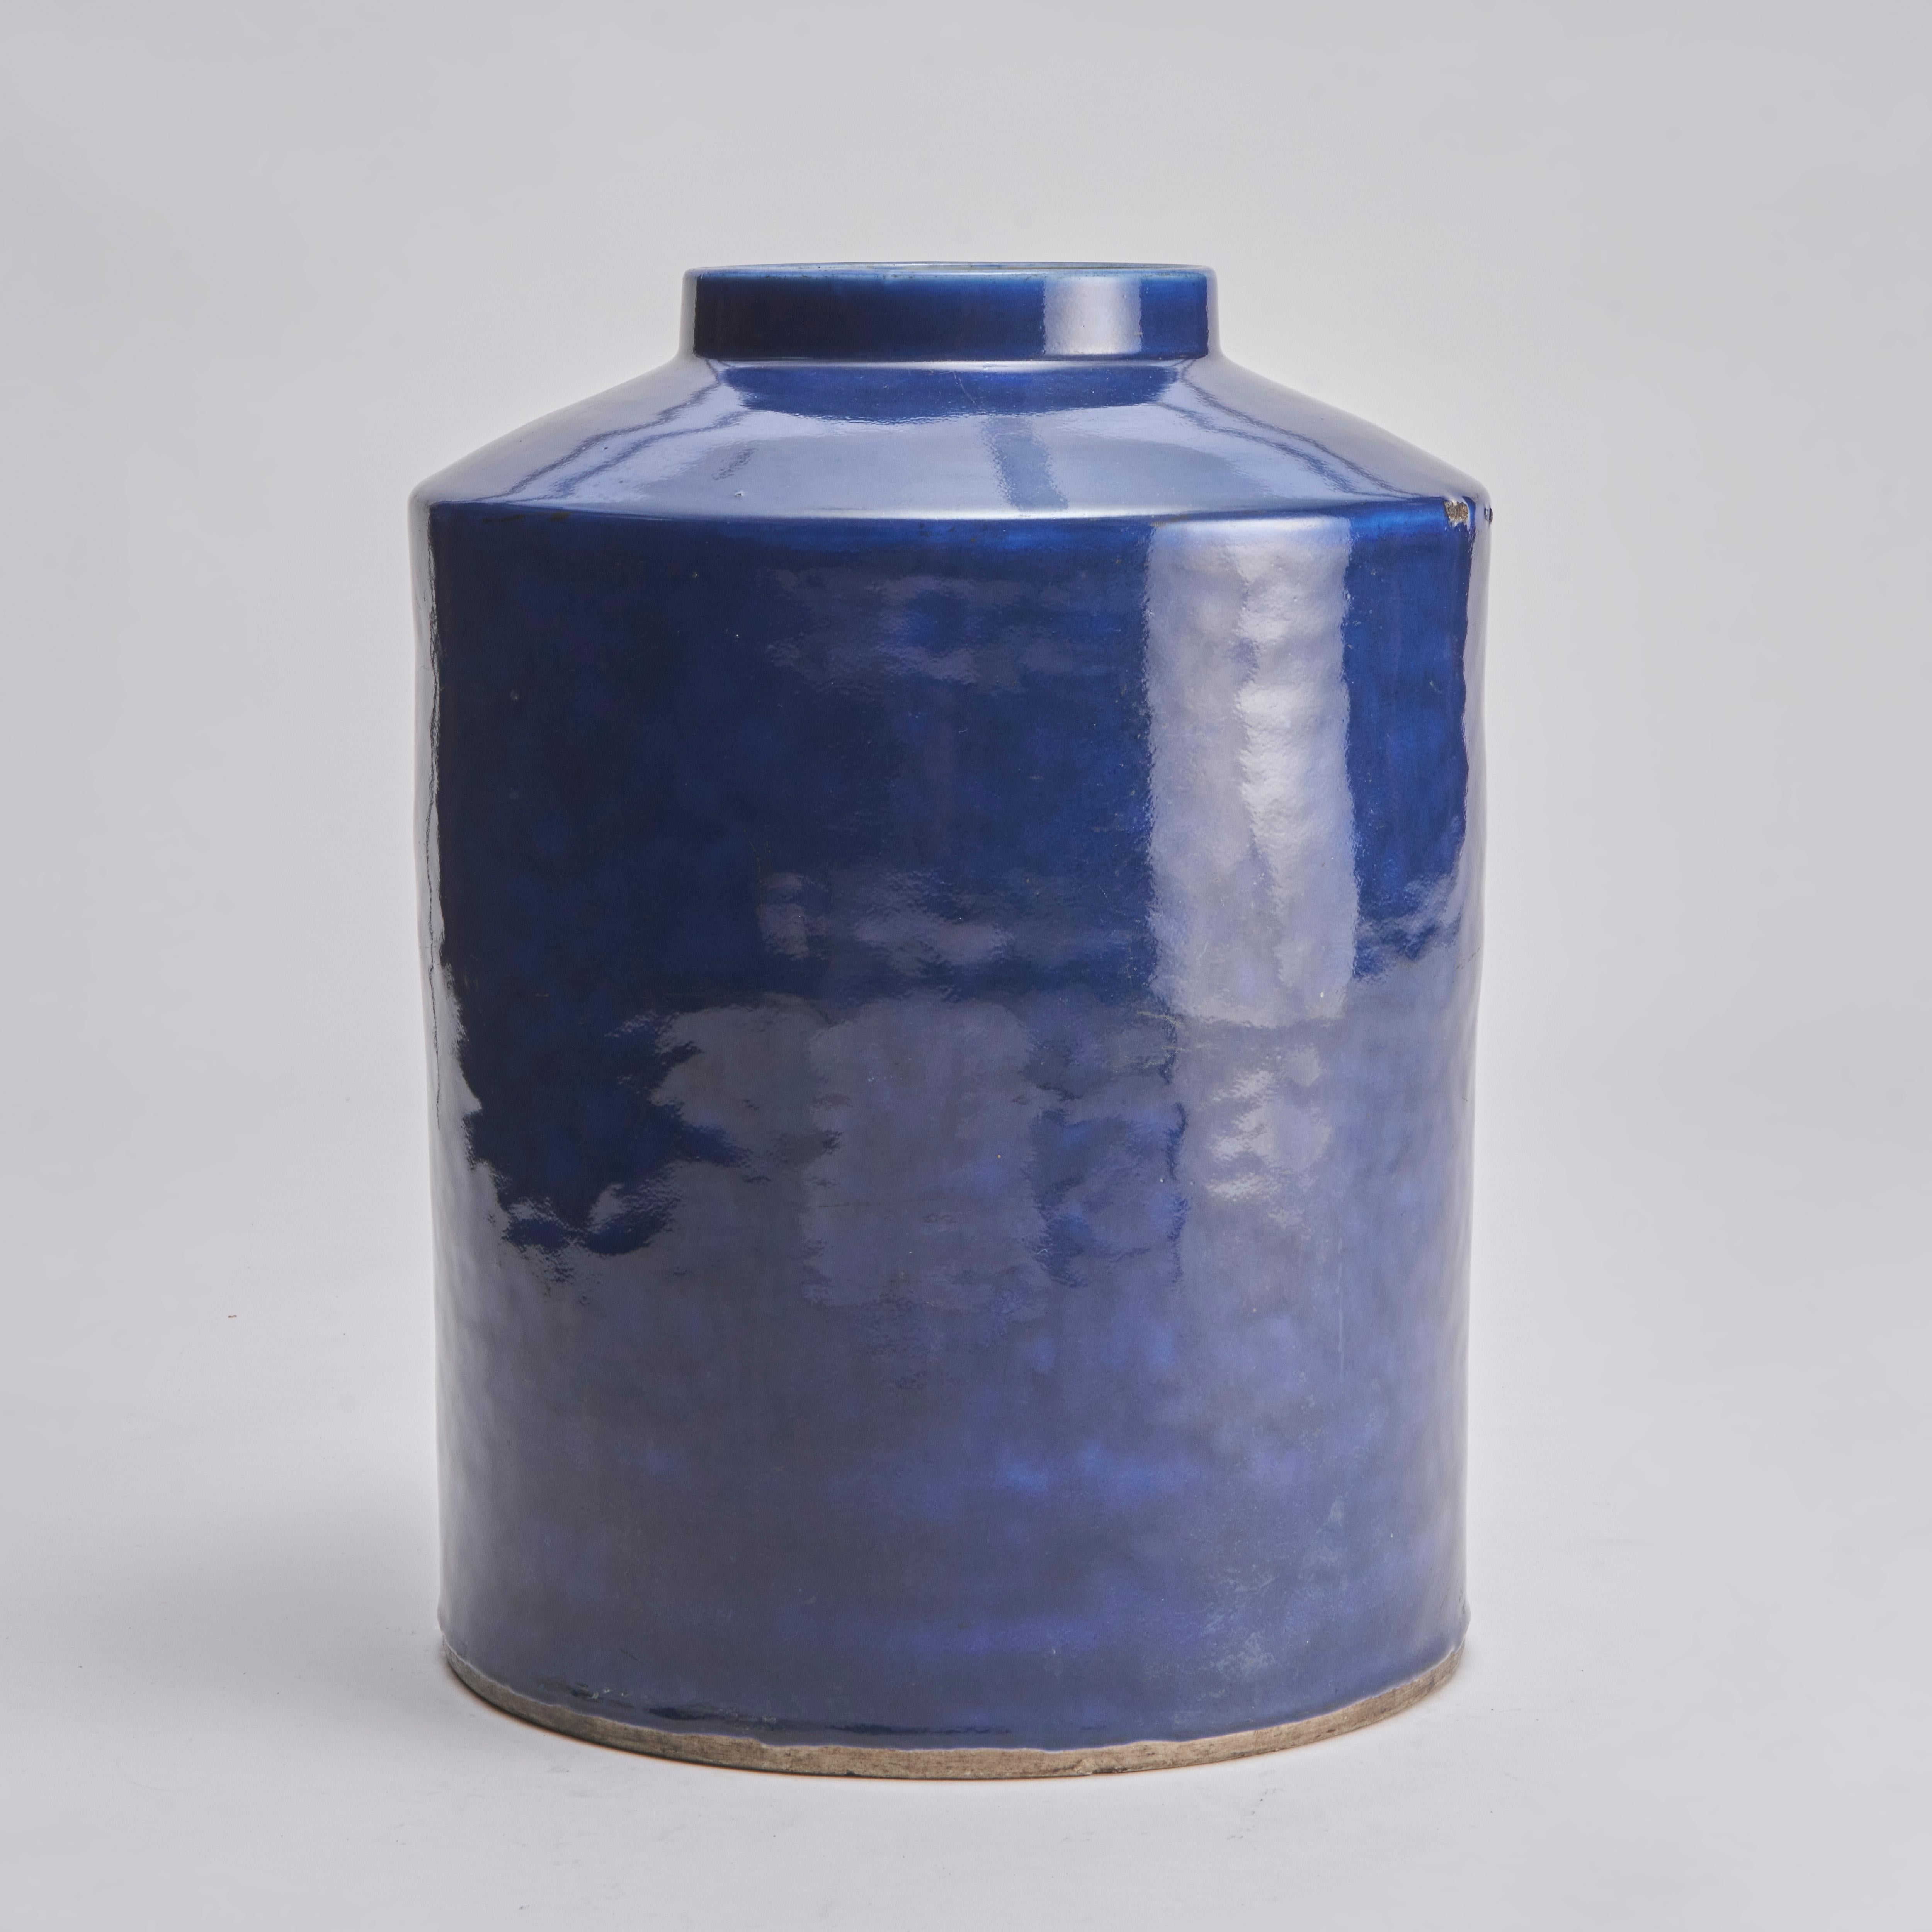 A large 18th century Chinese powder blue circular jar. This vessel was likely originally used for storing or transporting spices or tea from China to the West. The unusual shape bears resemblance to both tea jars and ginger jars of the